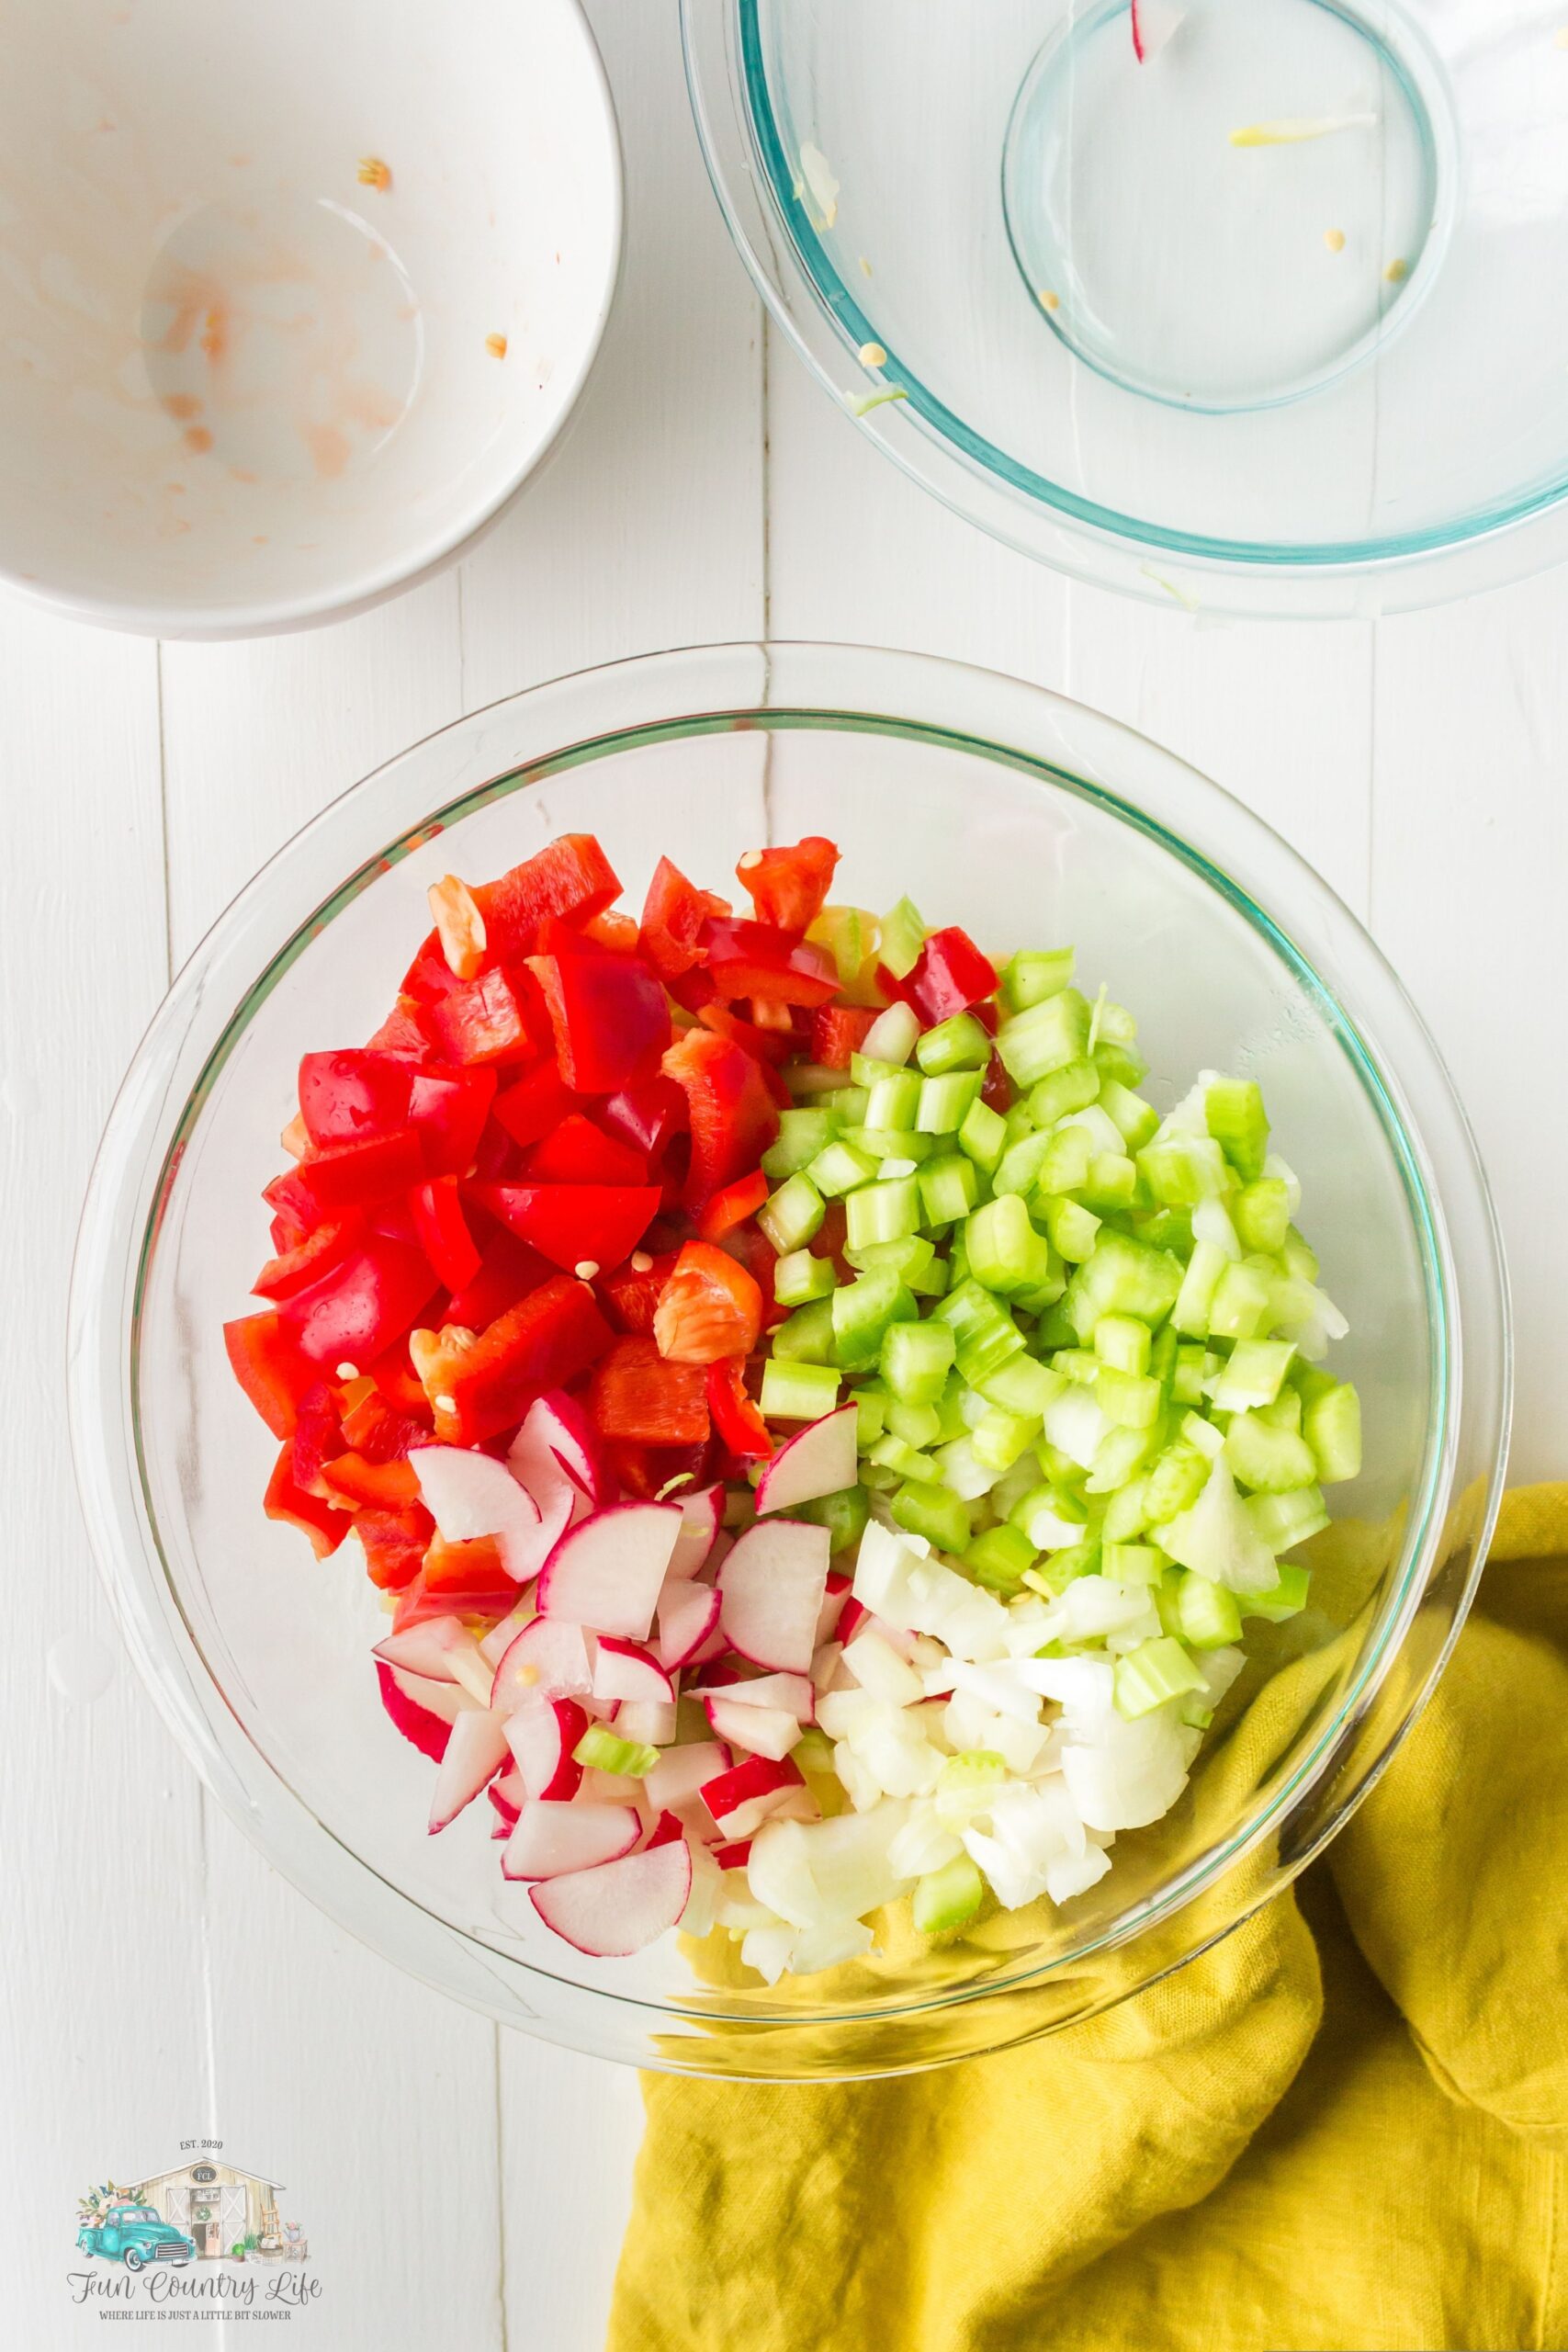 Red bell peppers, celery, onions, and radishes chopped up